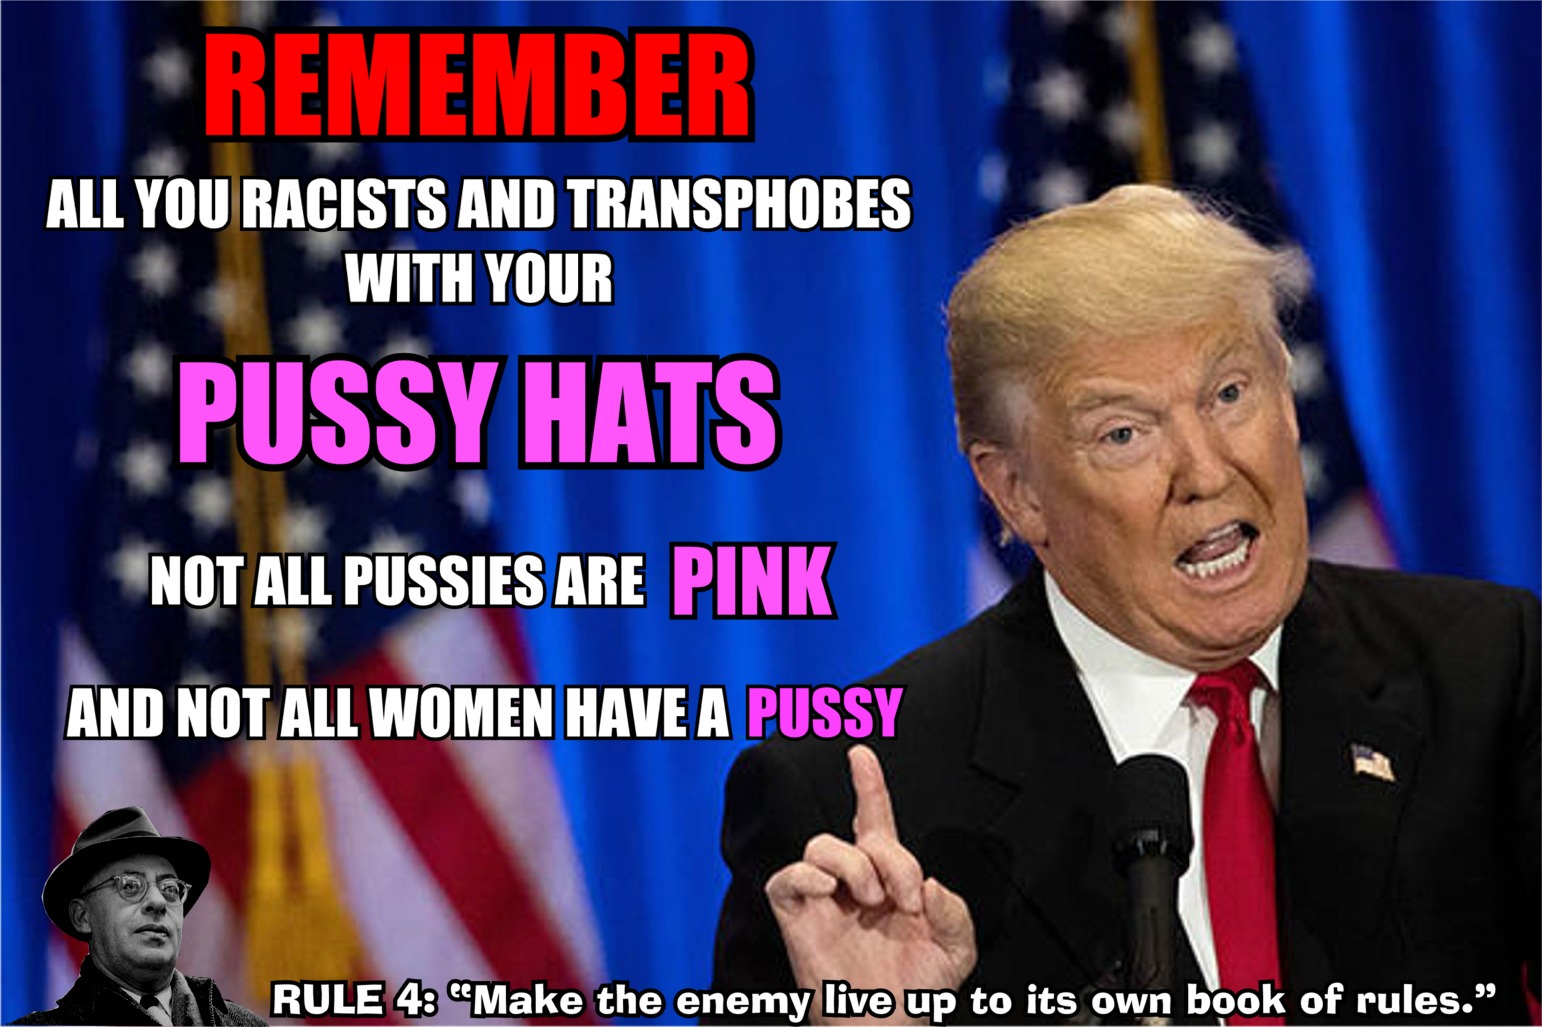 memes - jurassic world fallen kingdom wheaton - Remember All You Racists And Transphobes With Your Pussy Hats Not All Pussies Are Pink And Not All Women Have A Pussy Rule 4 C'Make the enemy live up to its own book of rules.